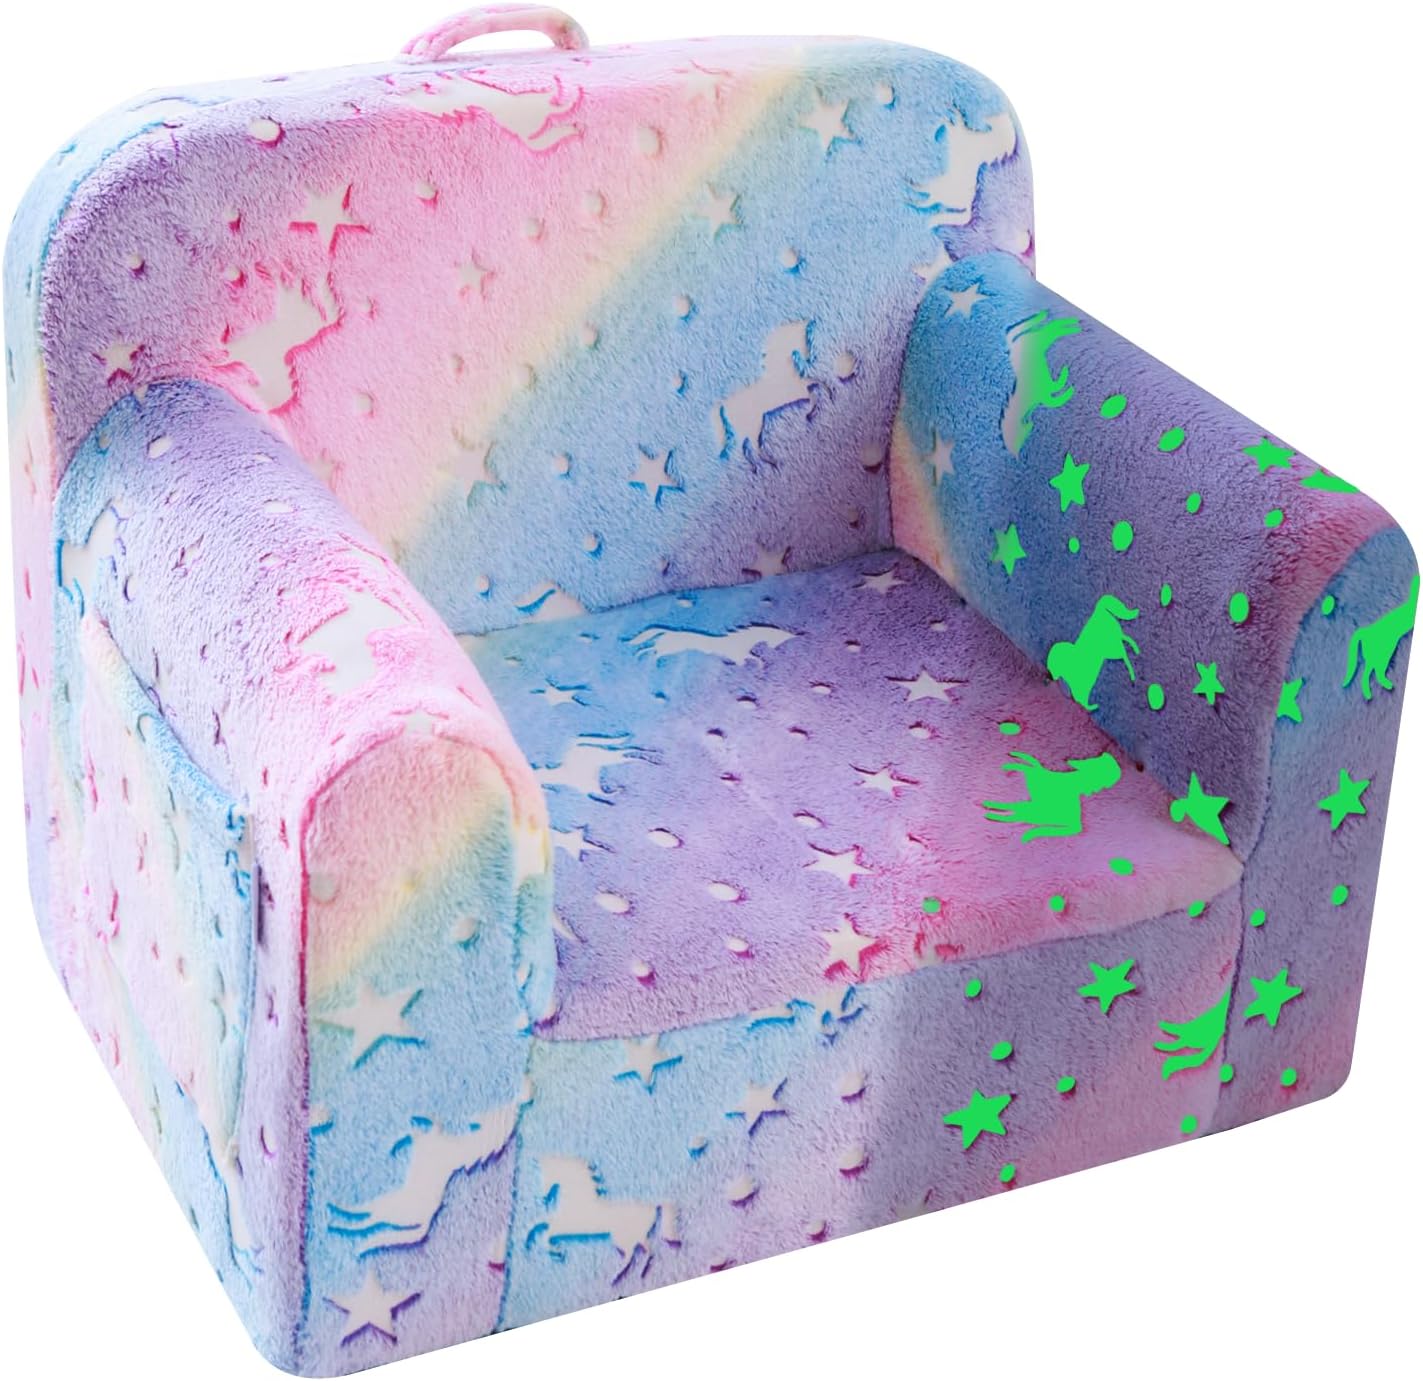 MeMoreCool Kids Couch Comfy Toddler Chair Plush Armchair, Baby Sofa Chair Soft Kid Foam Chair, Unicorn Children Chair Glowing Child Cozy Chair for Playroom Bedroom Furniture, Glow Sofa Colorful